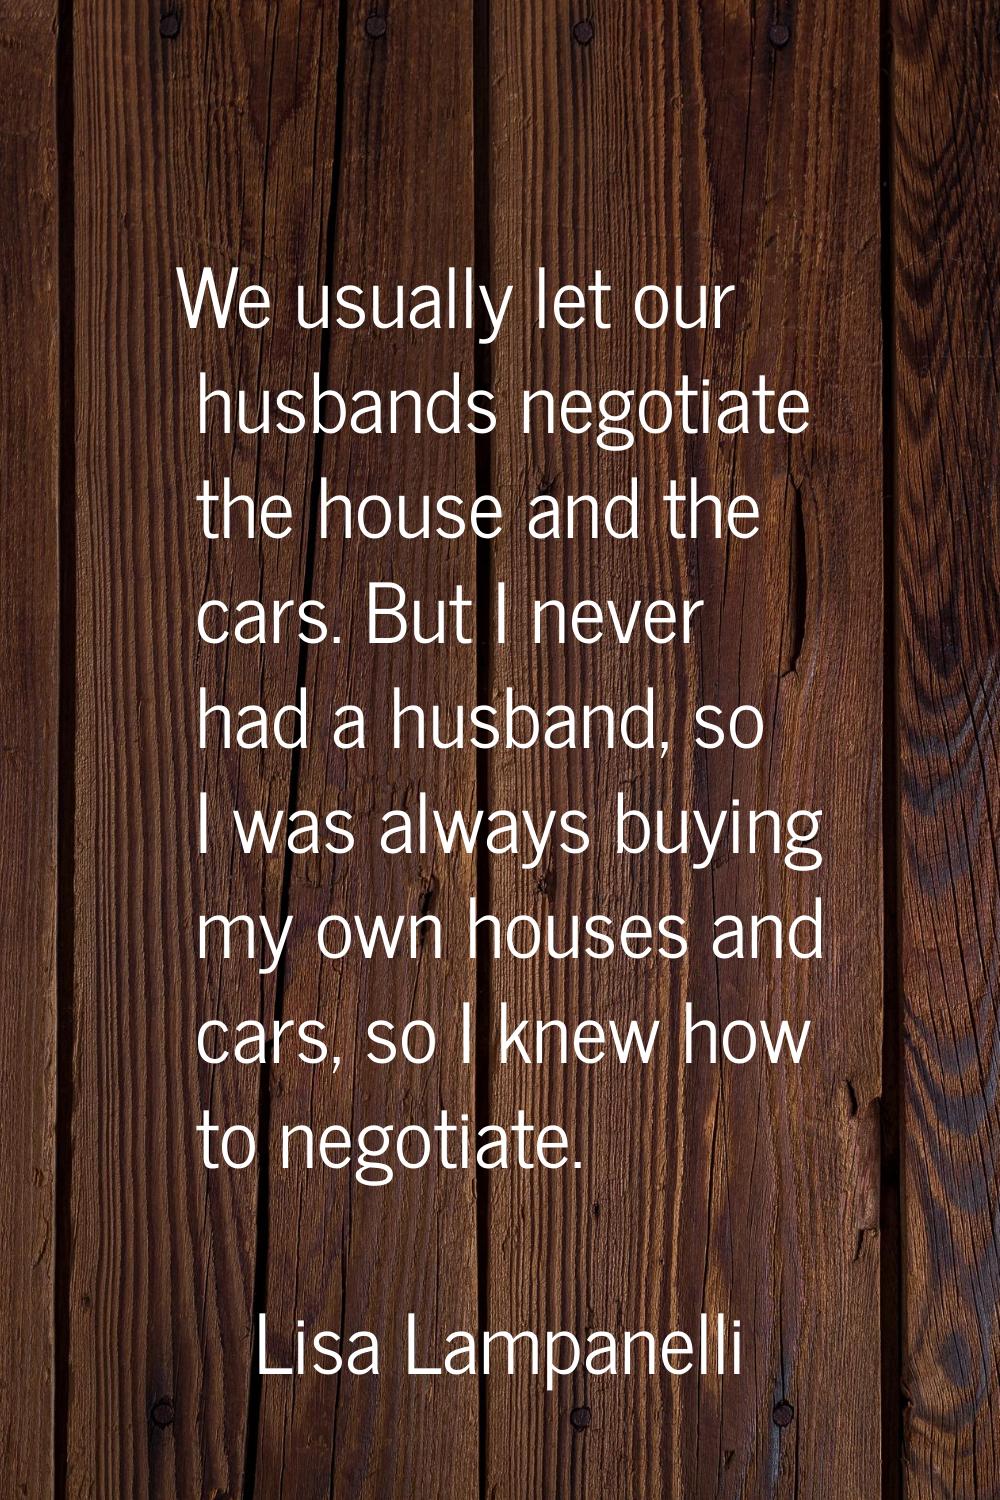 We usually let our husbands negotiate the house and the cars. But I never had a husband, so I was a